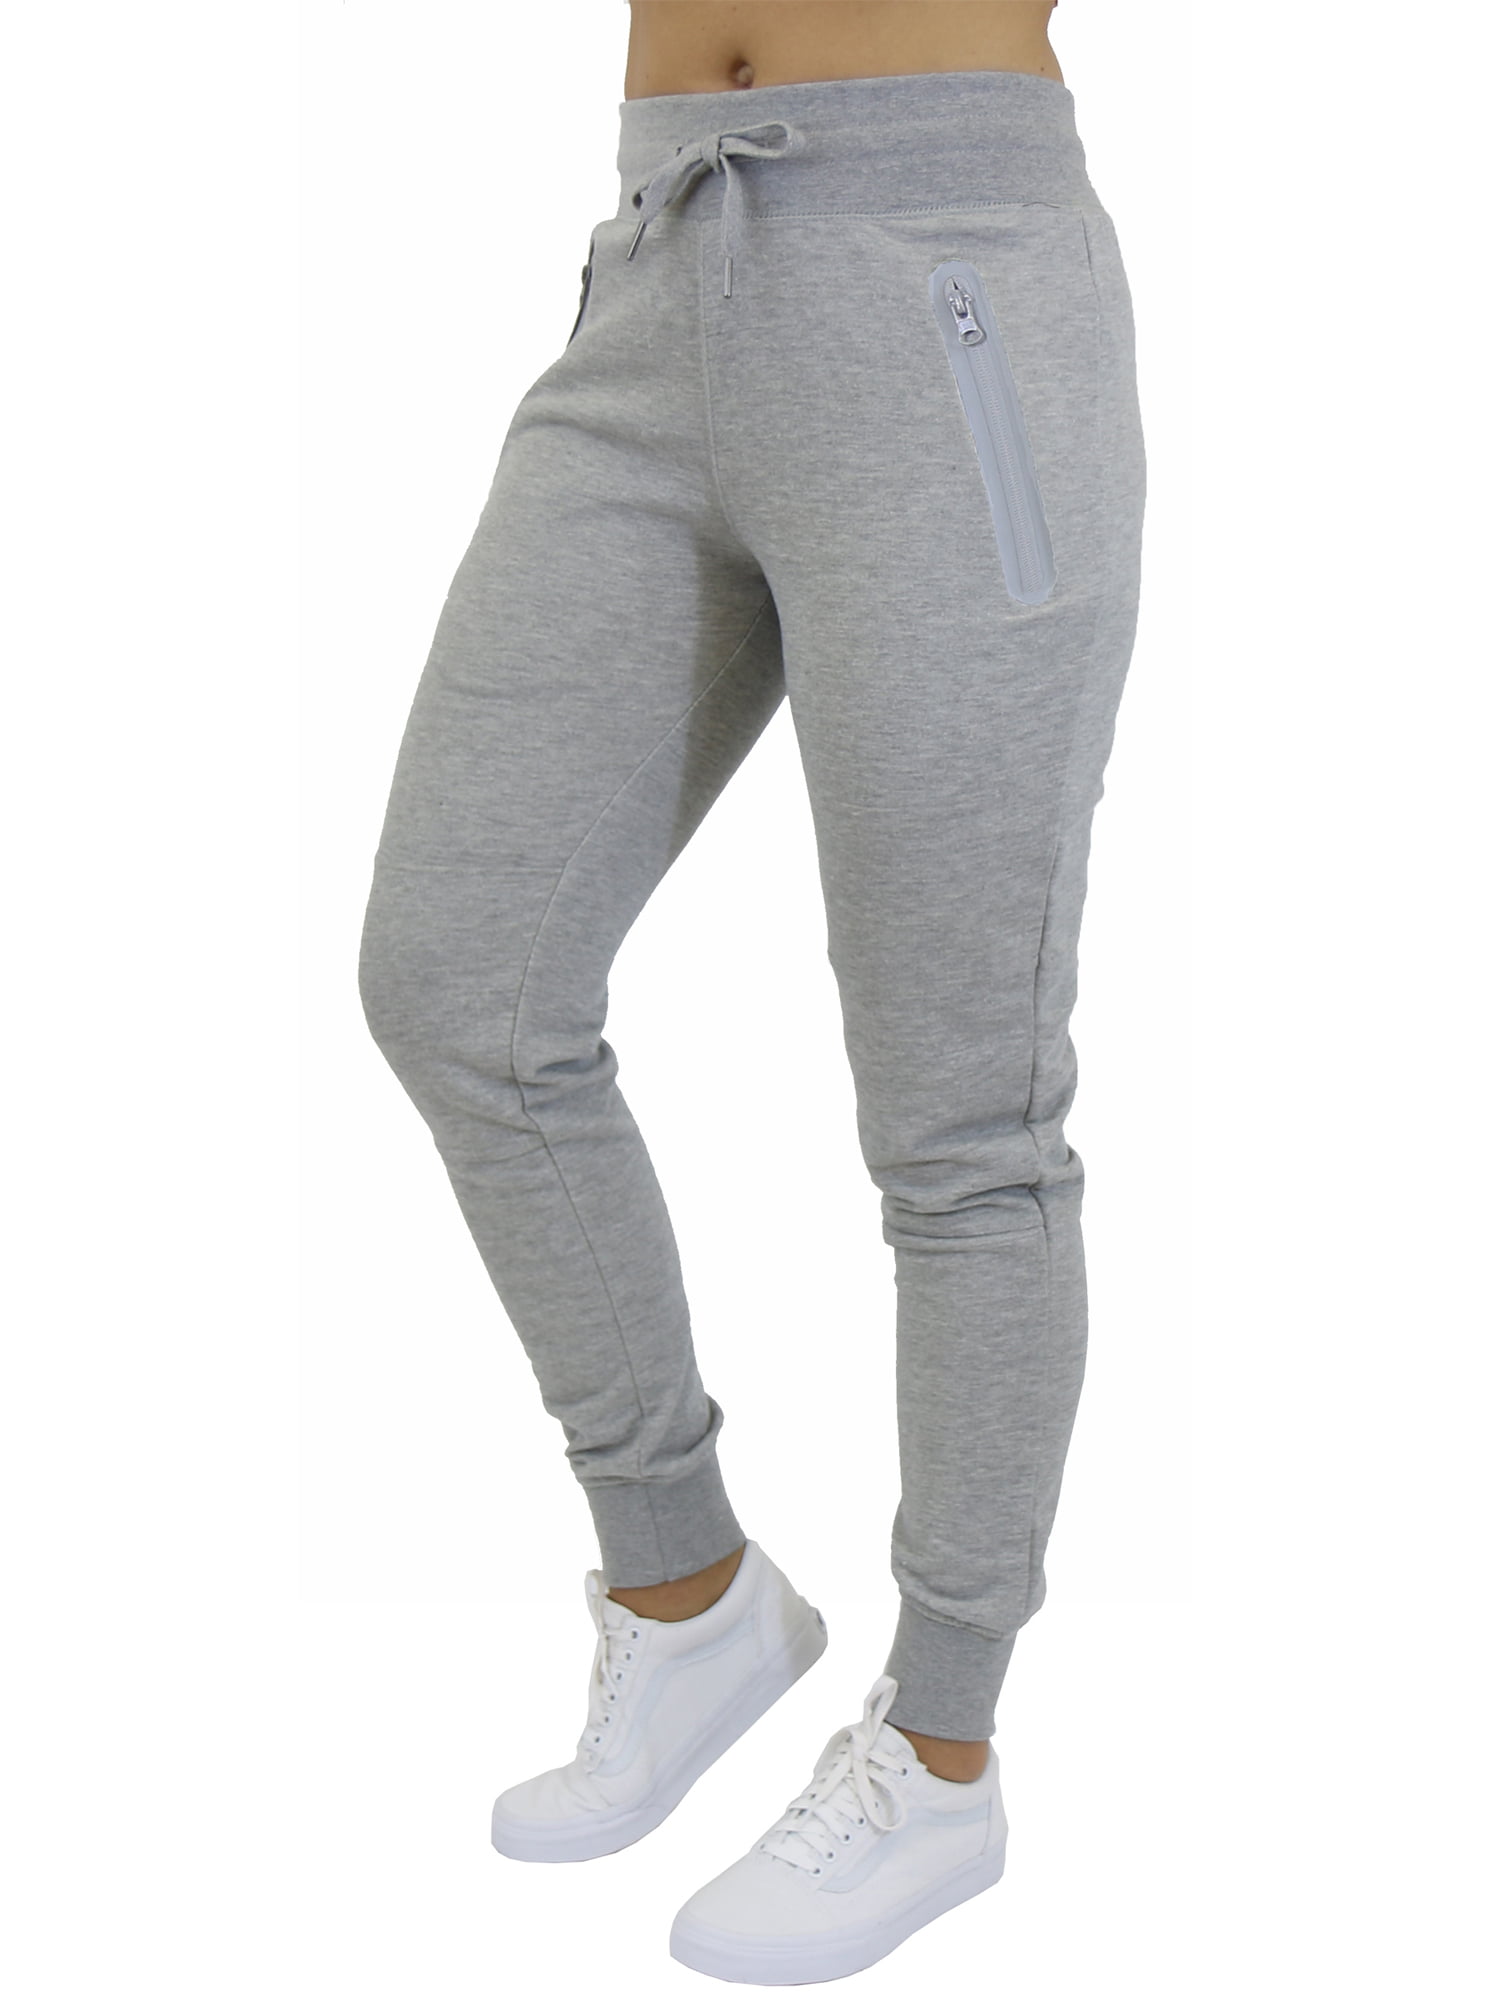 Buy,nike sweatpants with zipper pockets,Exclusive Deals and Offers ...